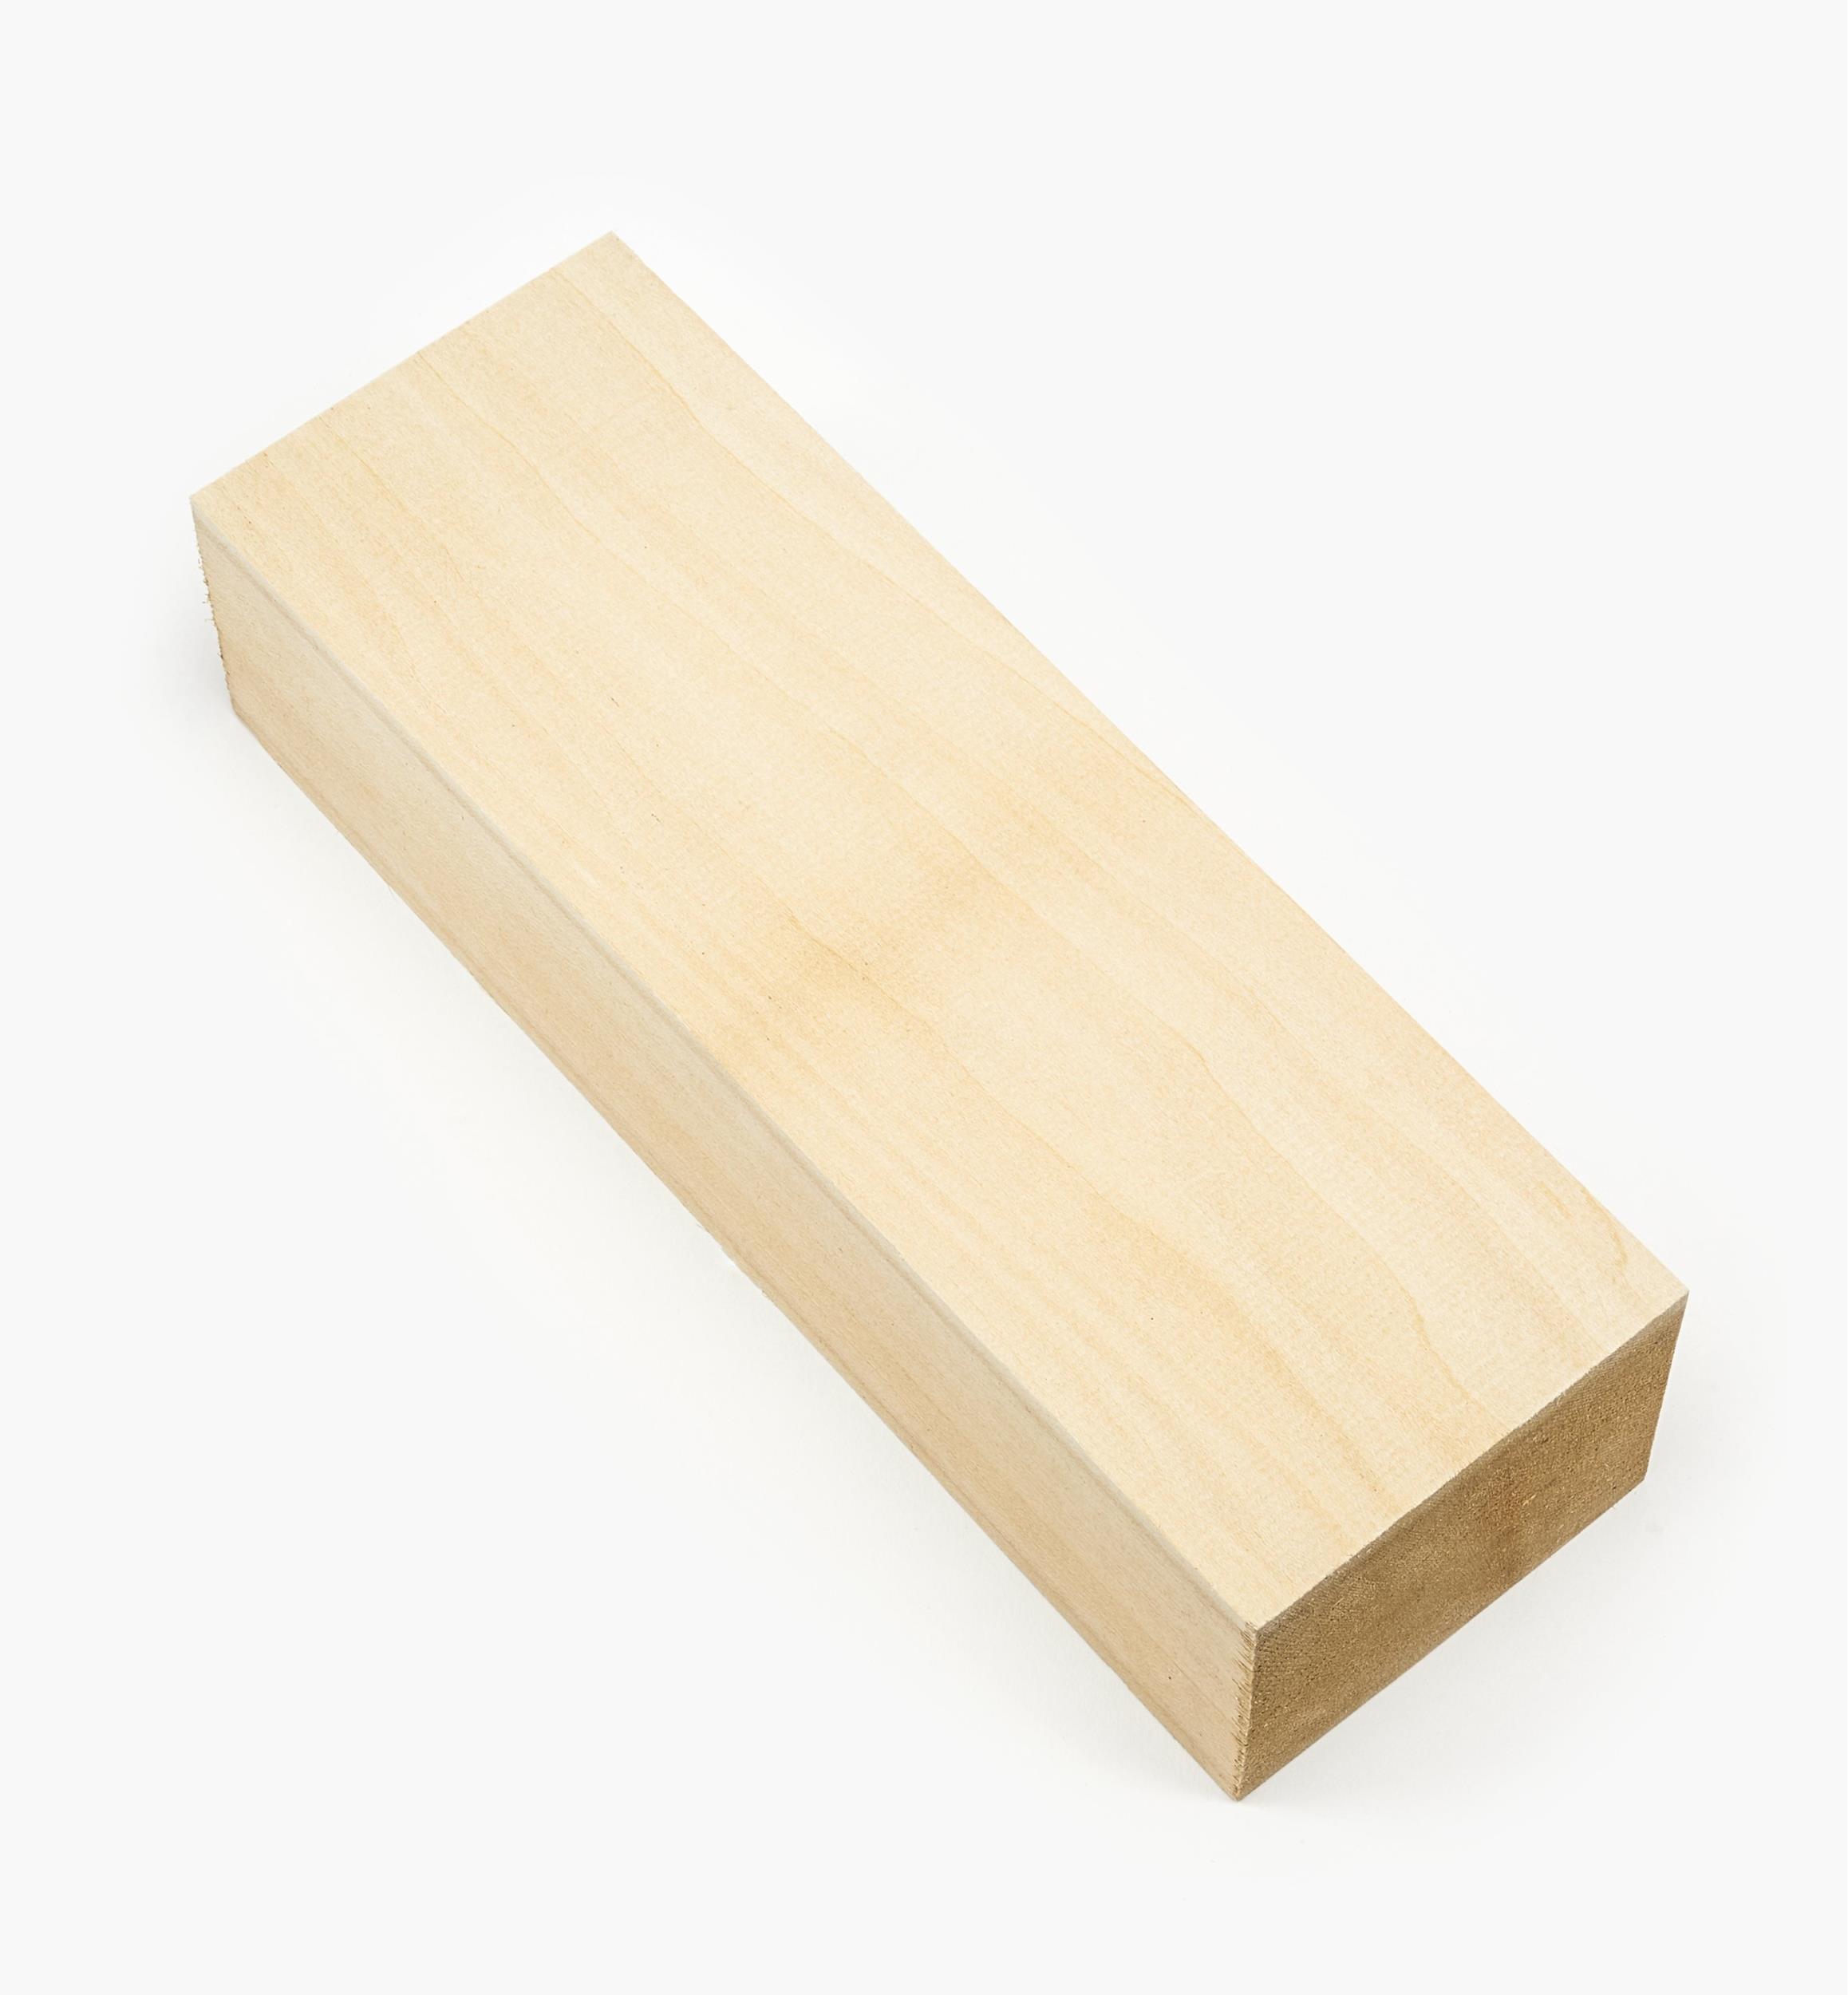 Only 22.92 usd for Kids at Work Basswood Blocks 5 Pieces Online at the Shop